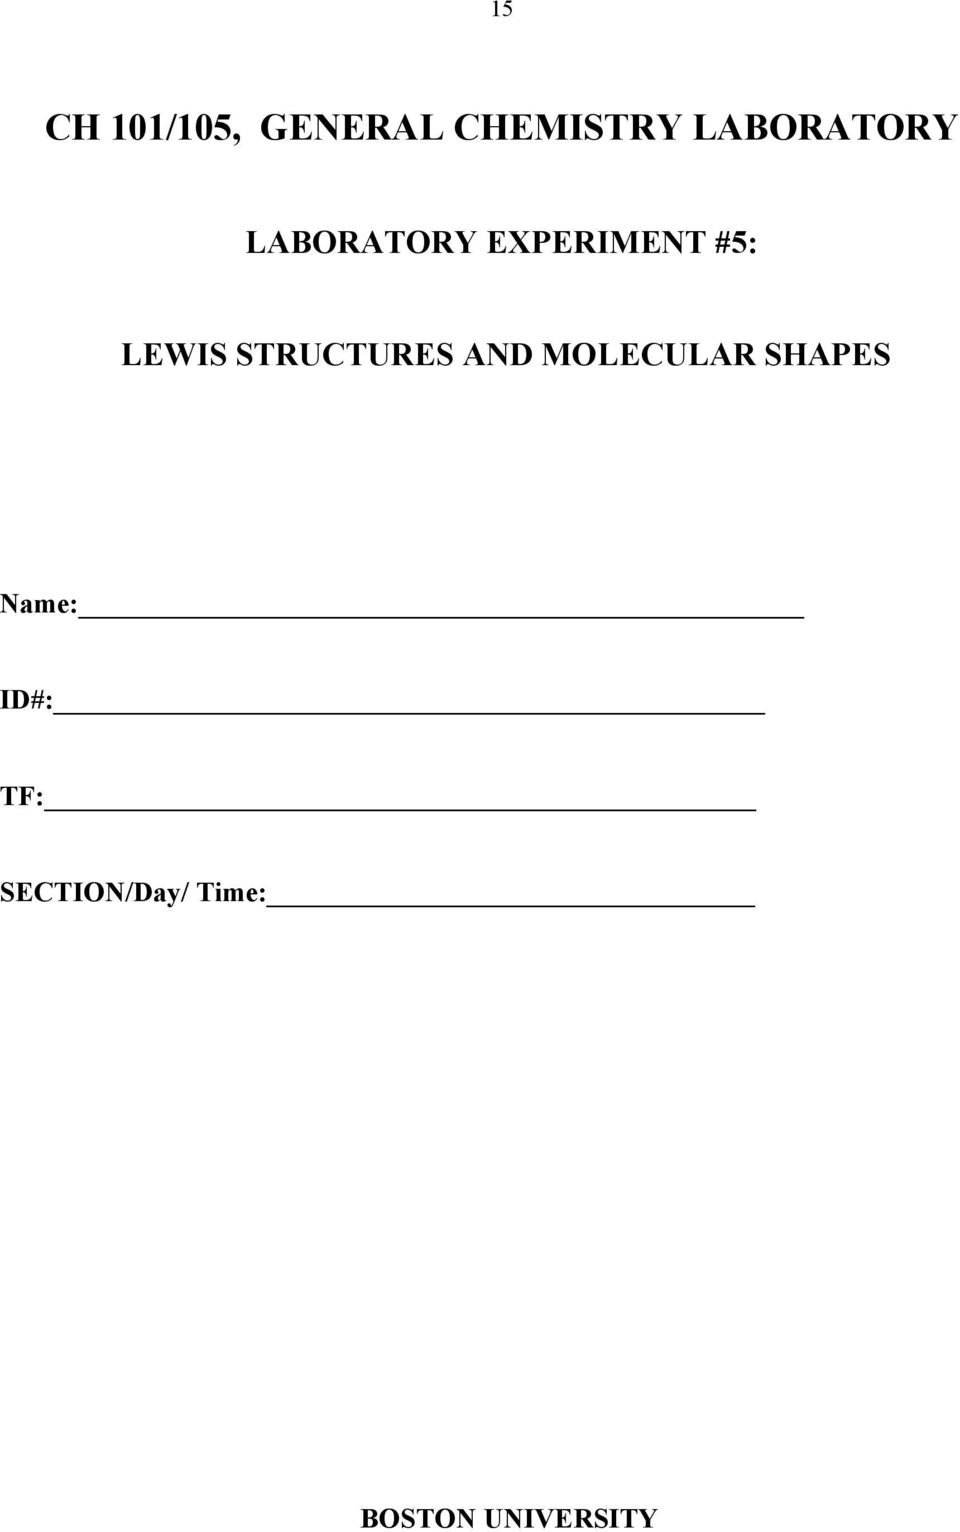 LEWI TRUCTURE AND MOLECULAR HAPE